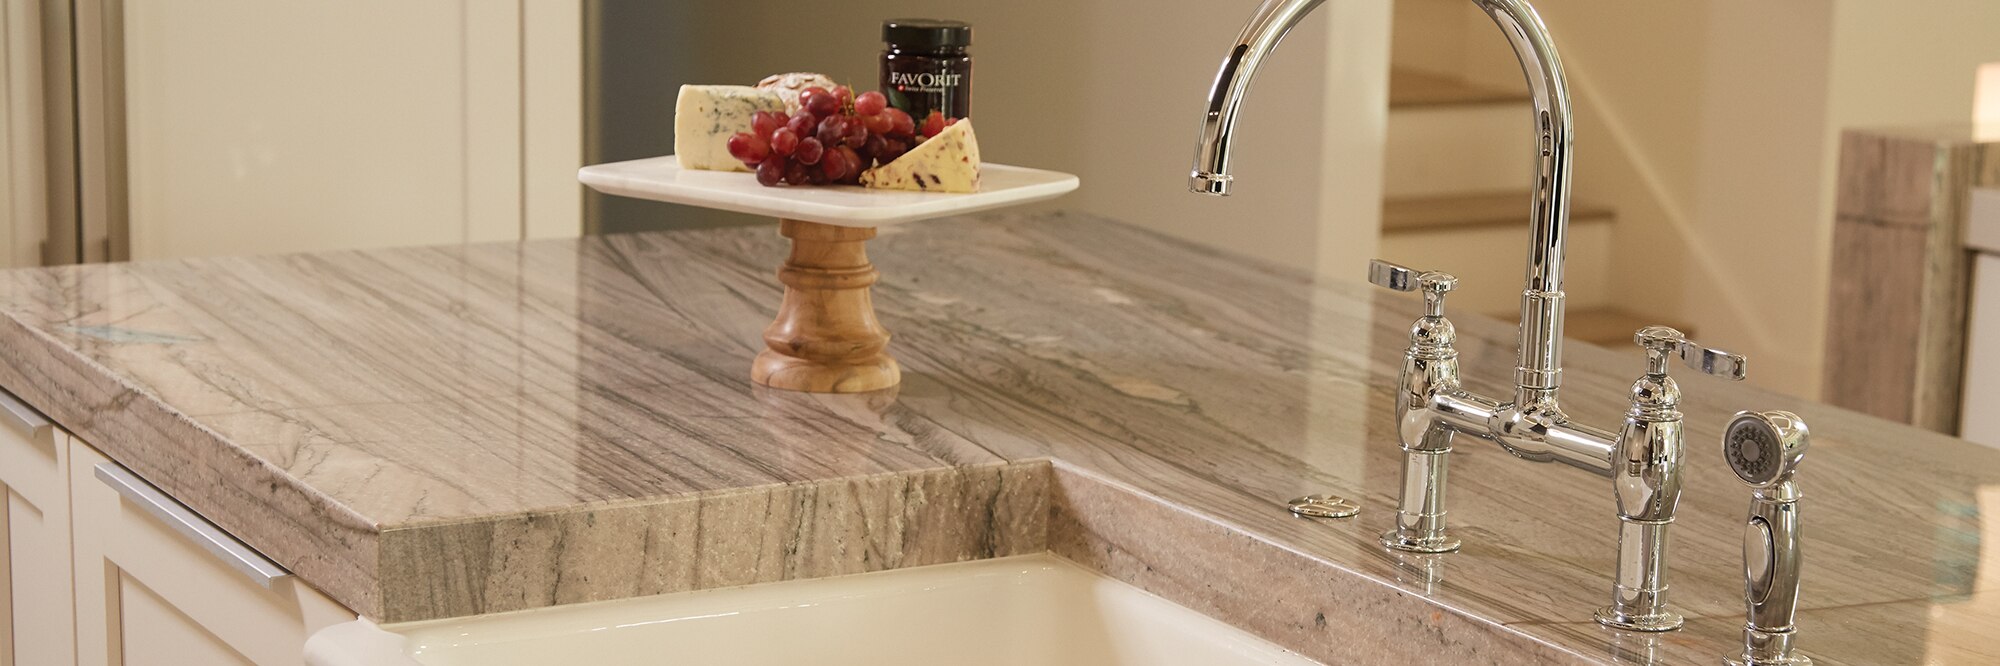 Closeup of kitchen island of tan quartzite countertop with black veining, built in sink, polished silver faucet, and tray of fruit and cheese.